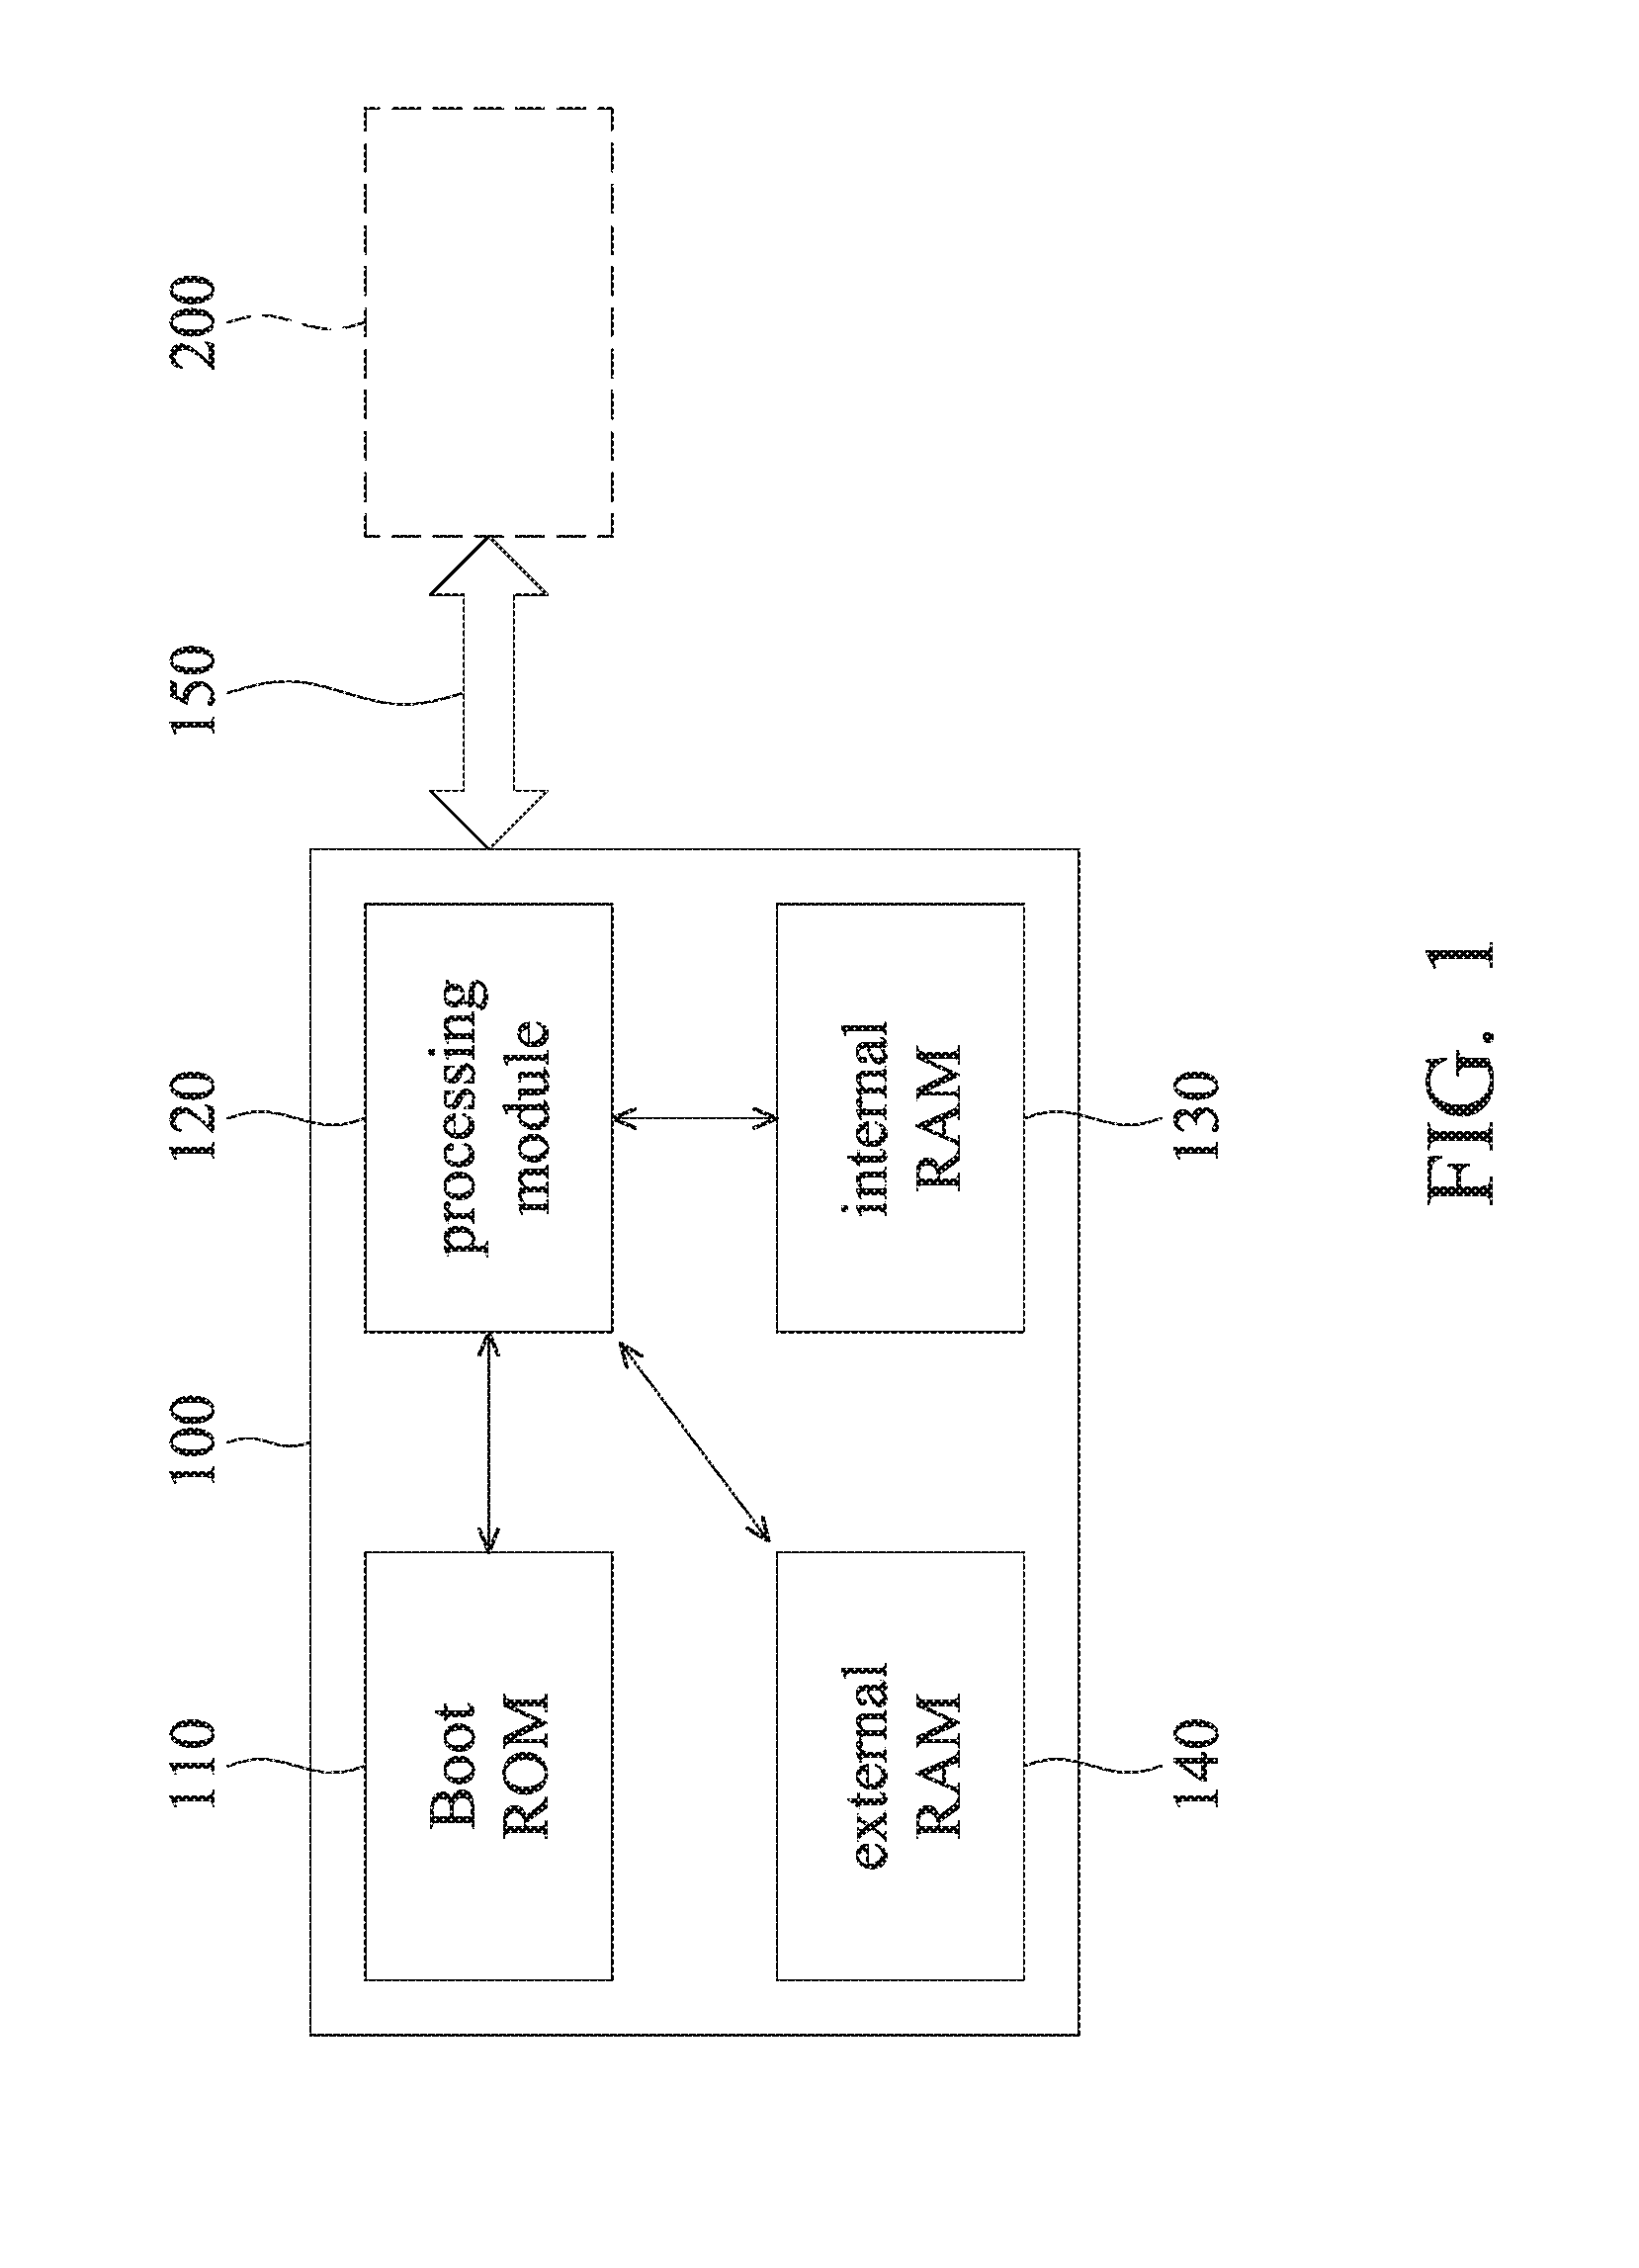 External devices, electronic devices, methods for starting external devices, and methods for data processing